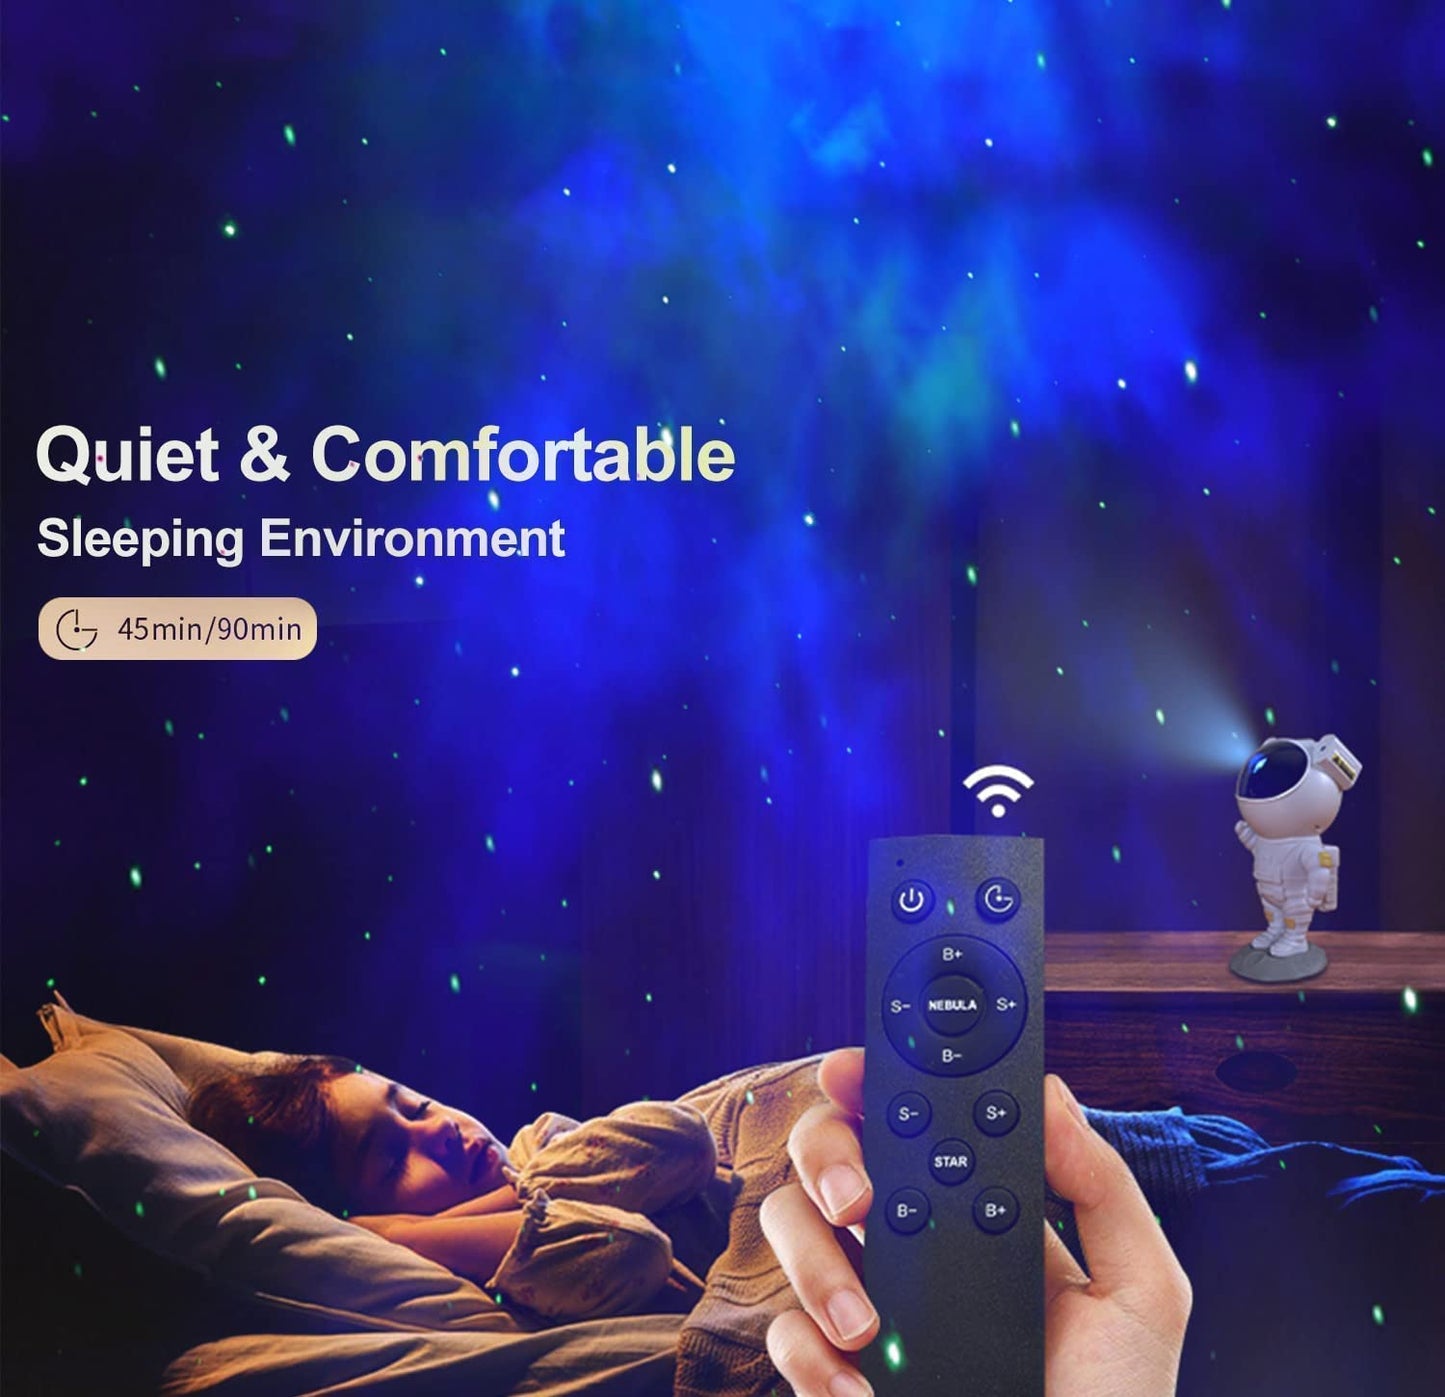 Astronaut Galaxy 360° Projector with Remote Control